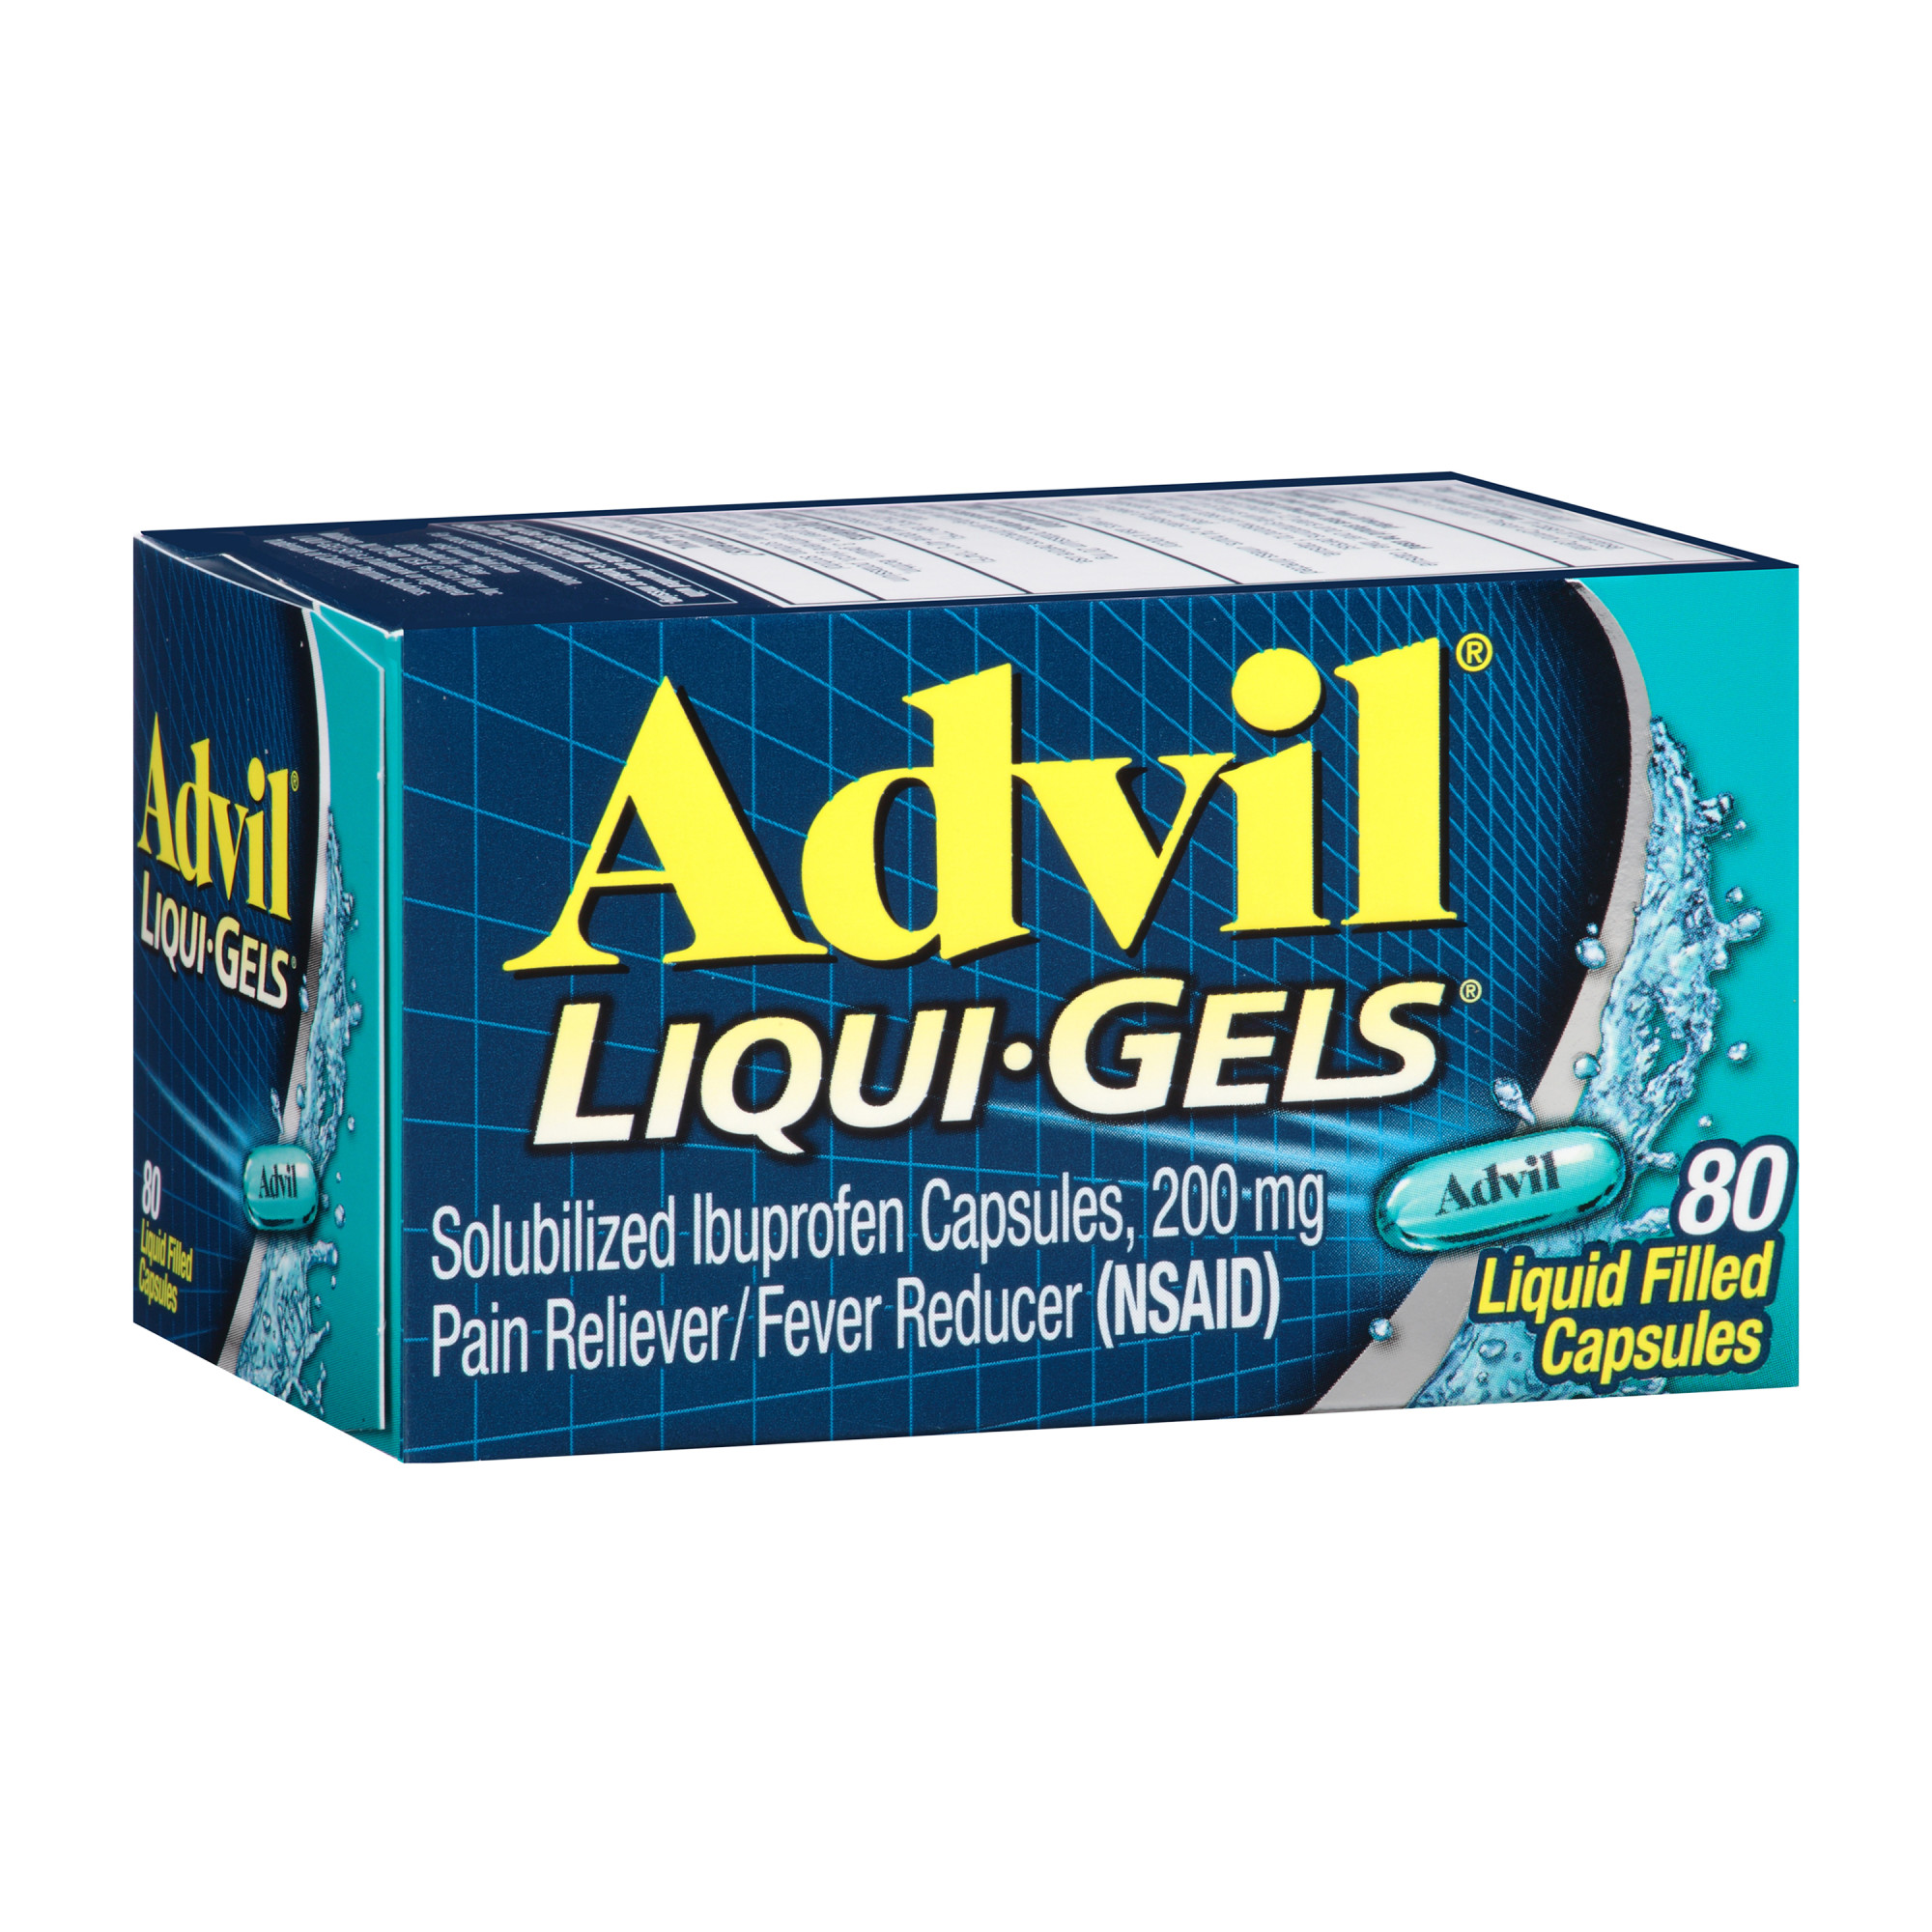 Advil Liqui-Gels Pain Relievers and Fever Reducer Liquid Filled Capsules, 200 Mg Ibuprofen, 80 Count - image 1 of 11